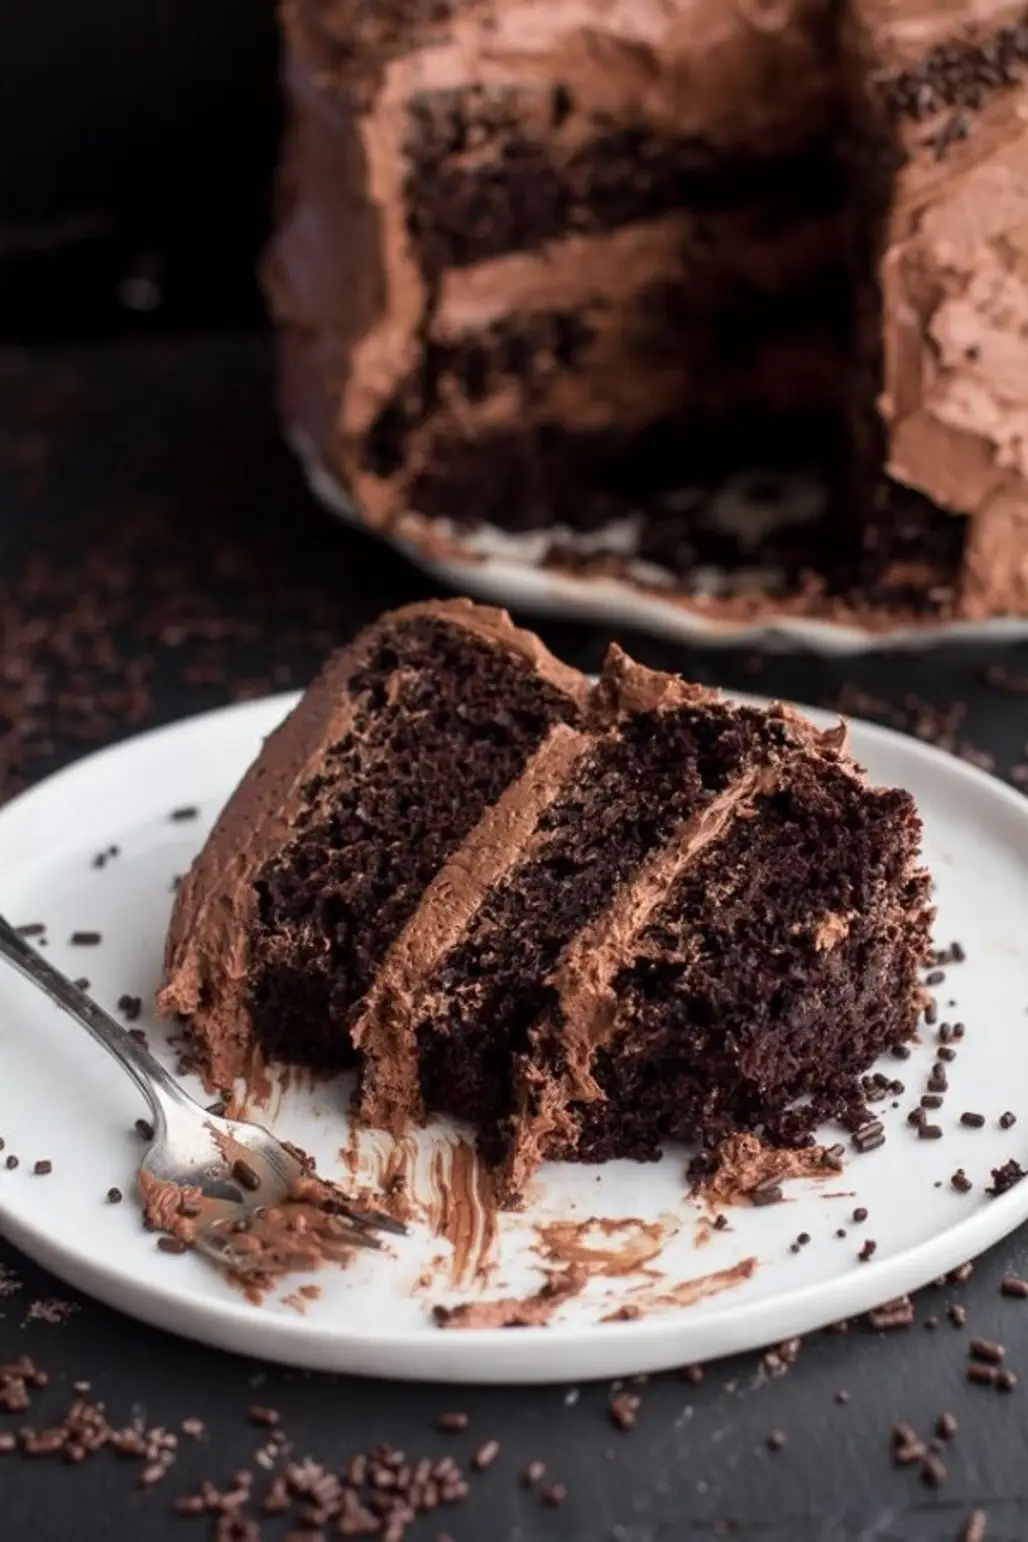 Simple Chocolate Birthday Cake with Whipped Chocolate Buttercream